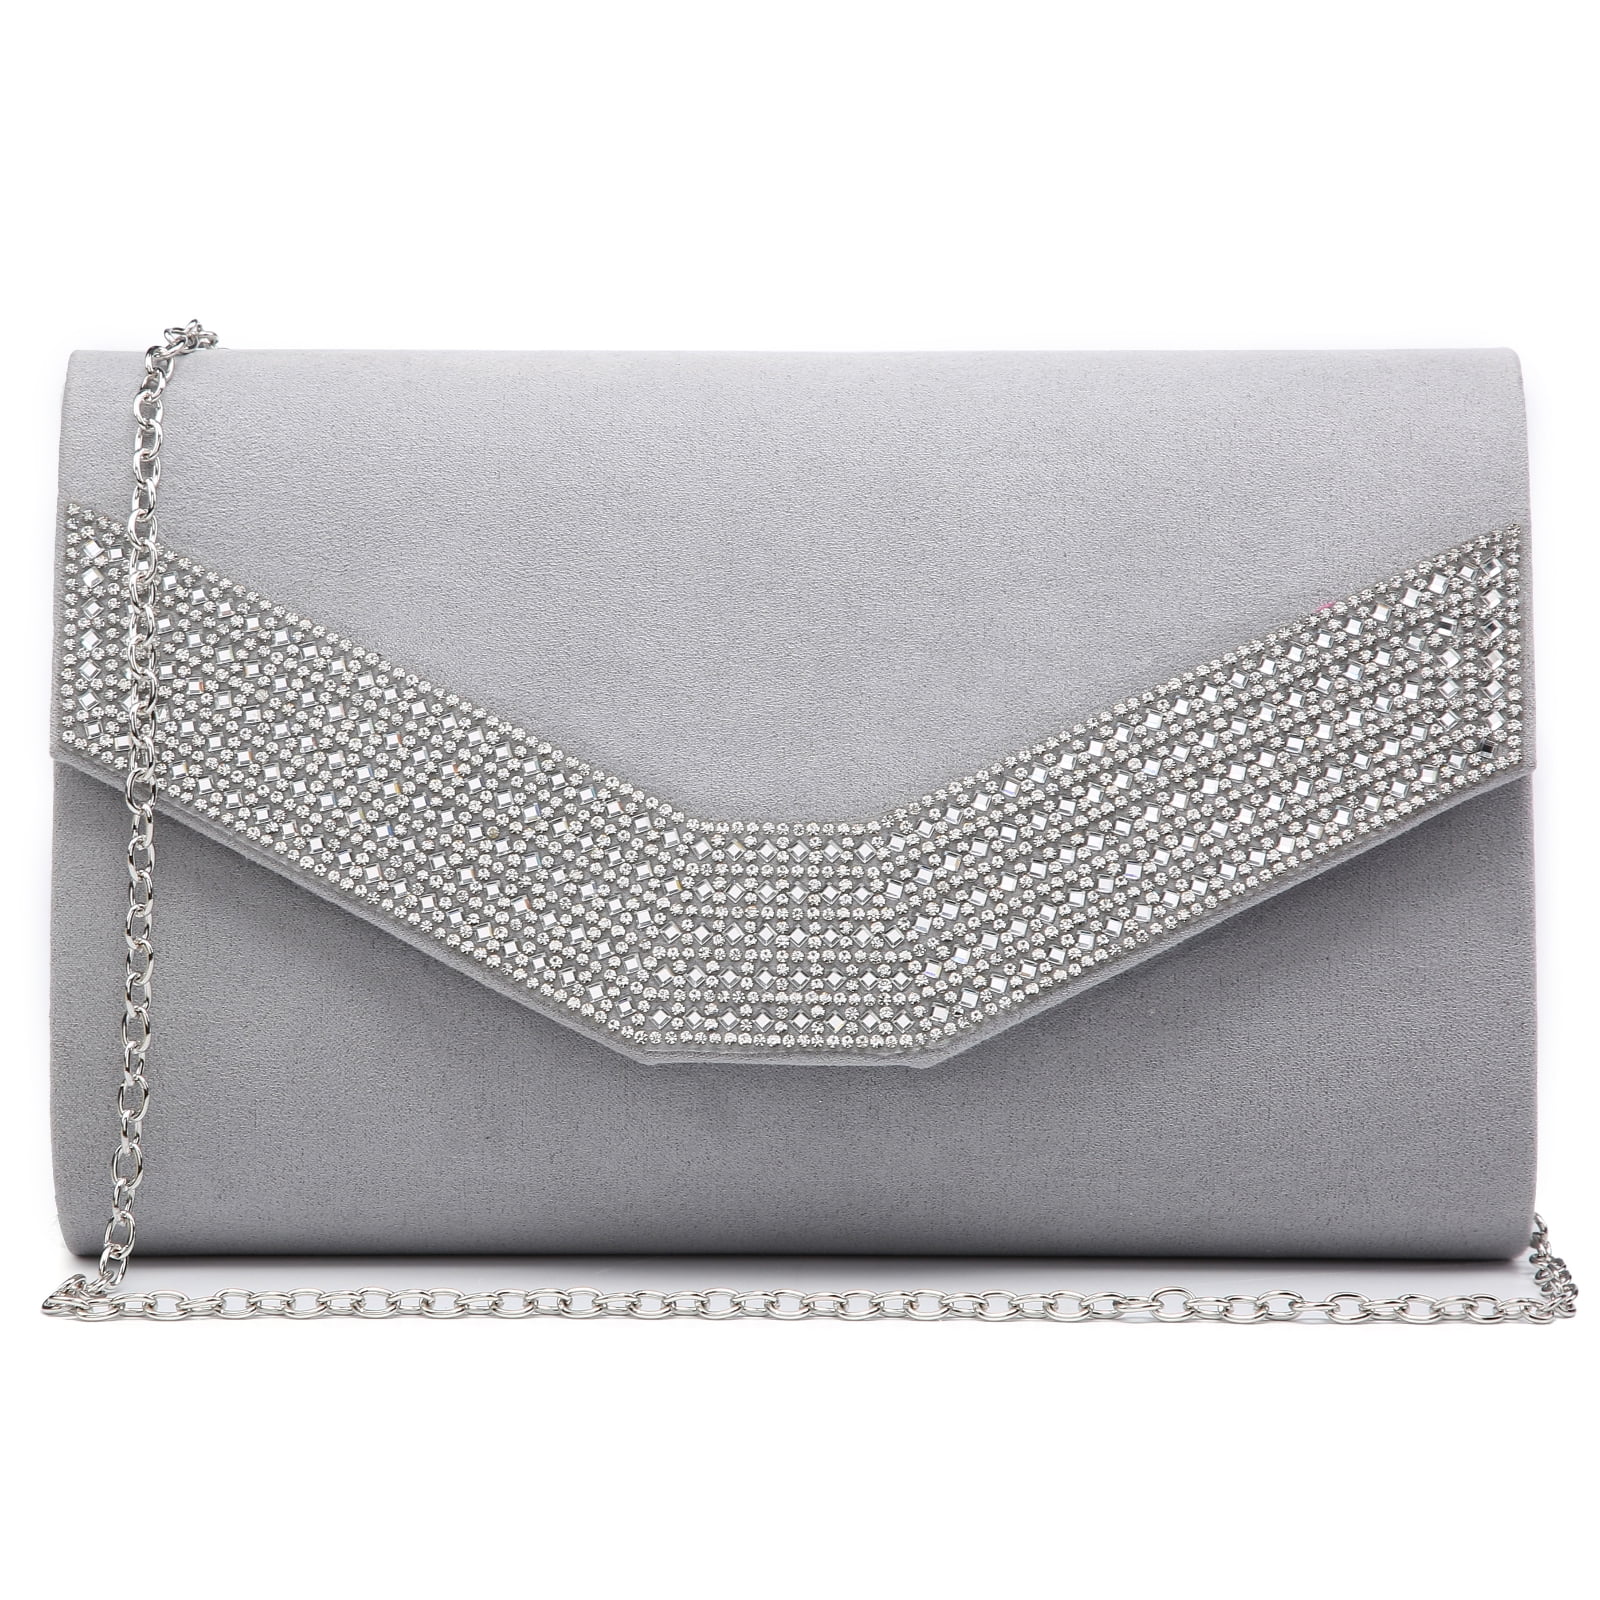 Dasein Women's Evening Bags Formal Party Clutches Wedding Purses ...